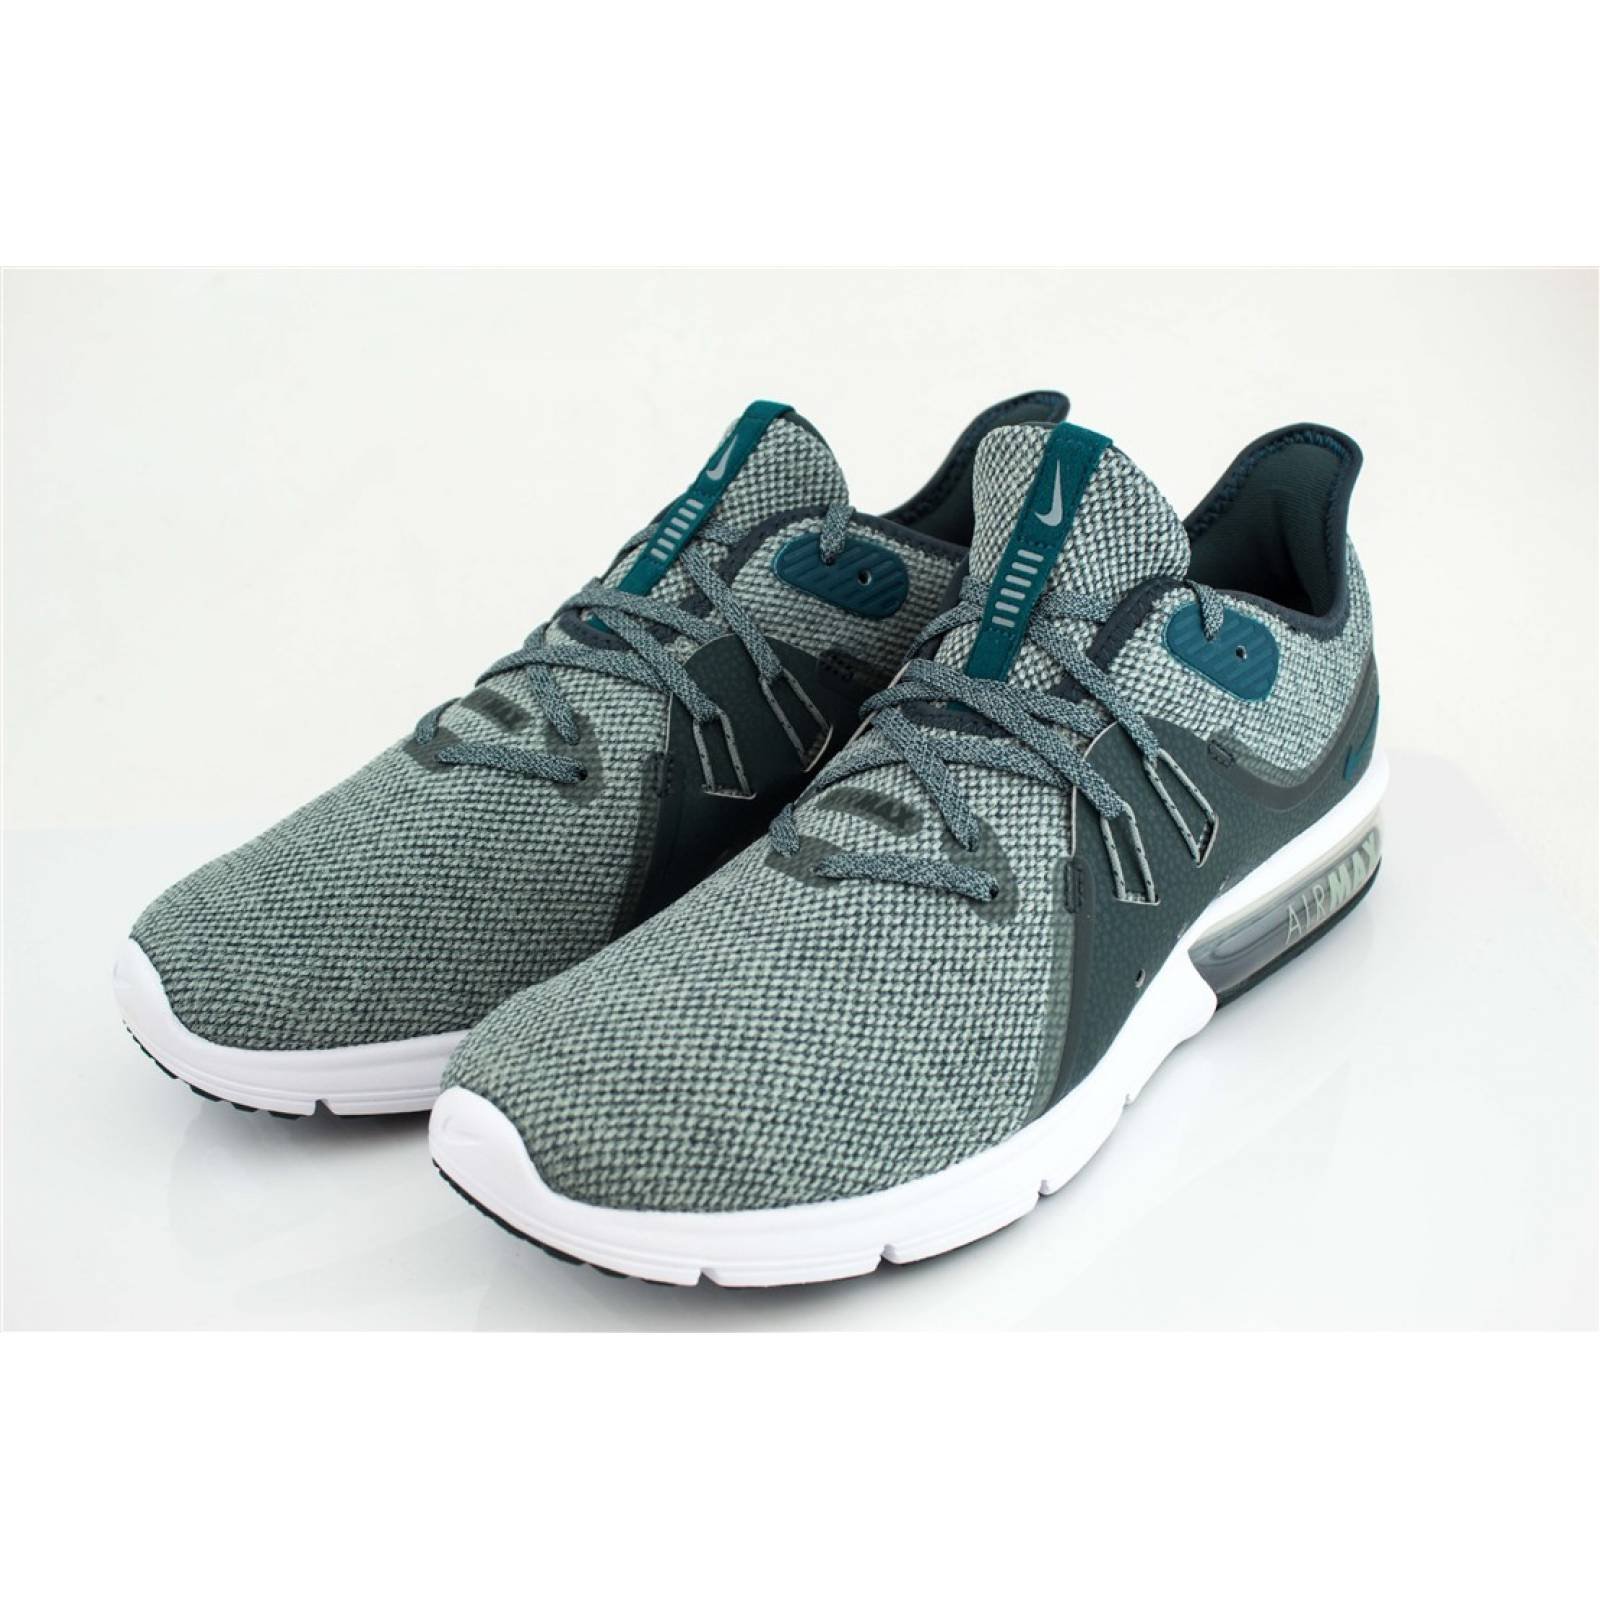 tenis nike air max sequent 3 color verde con blanco